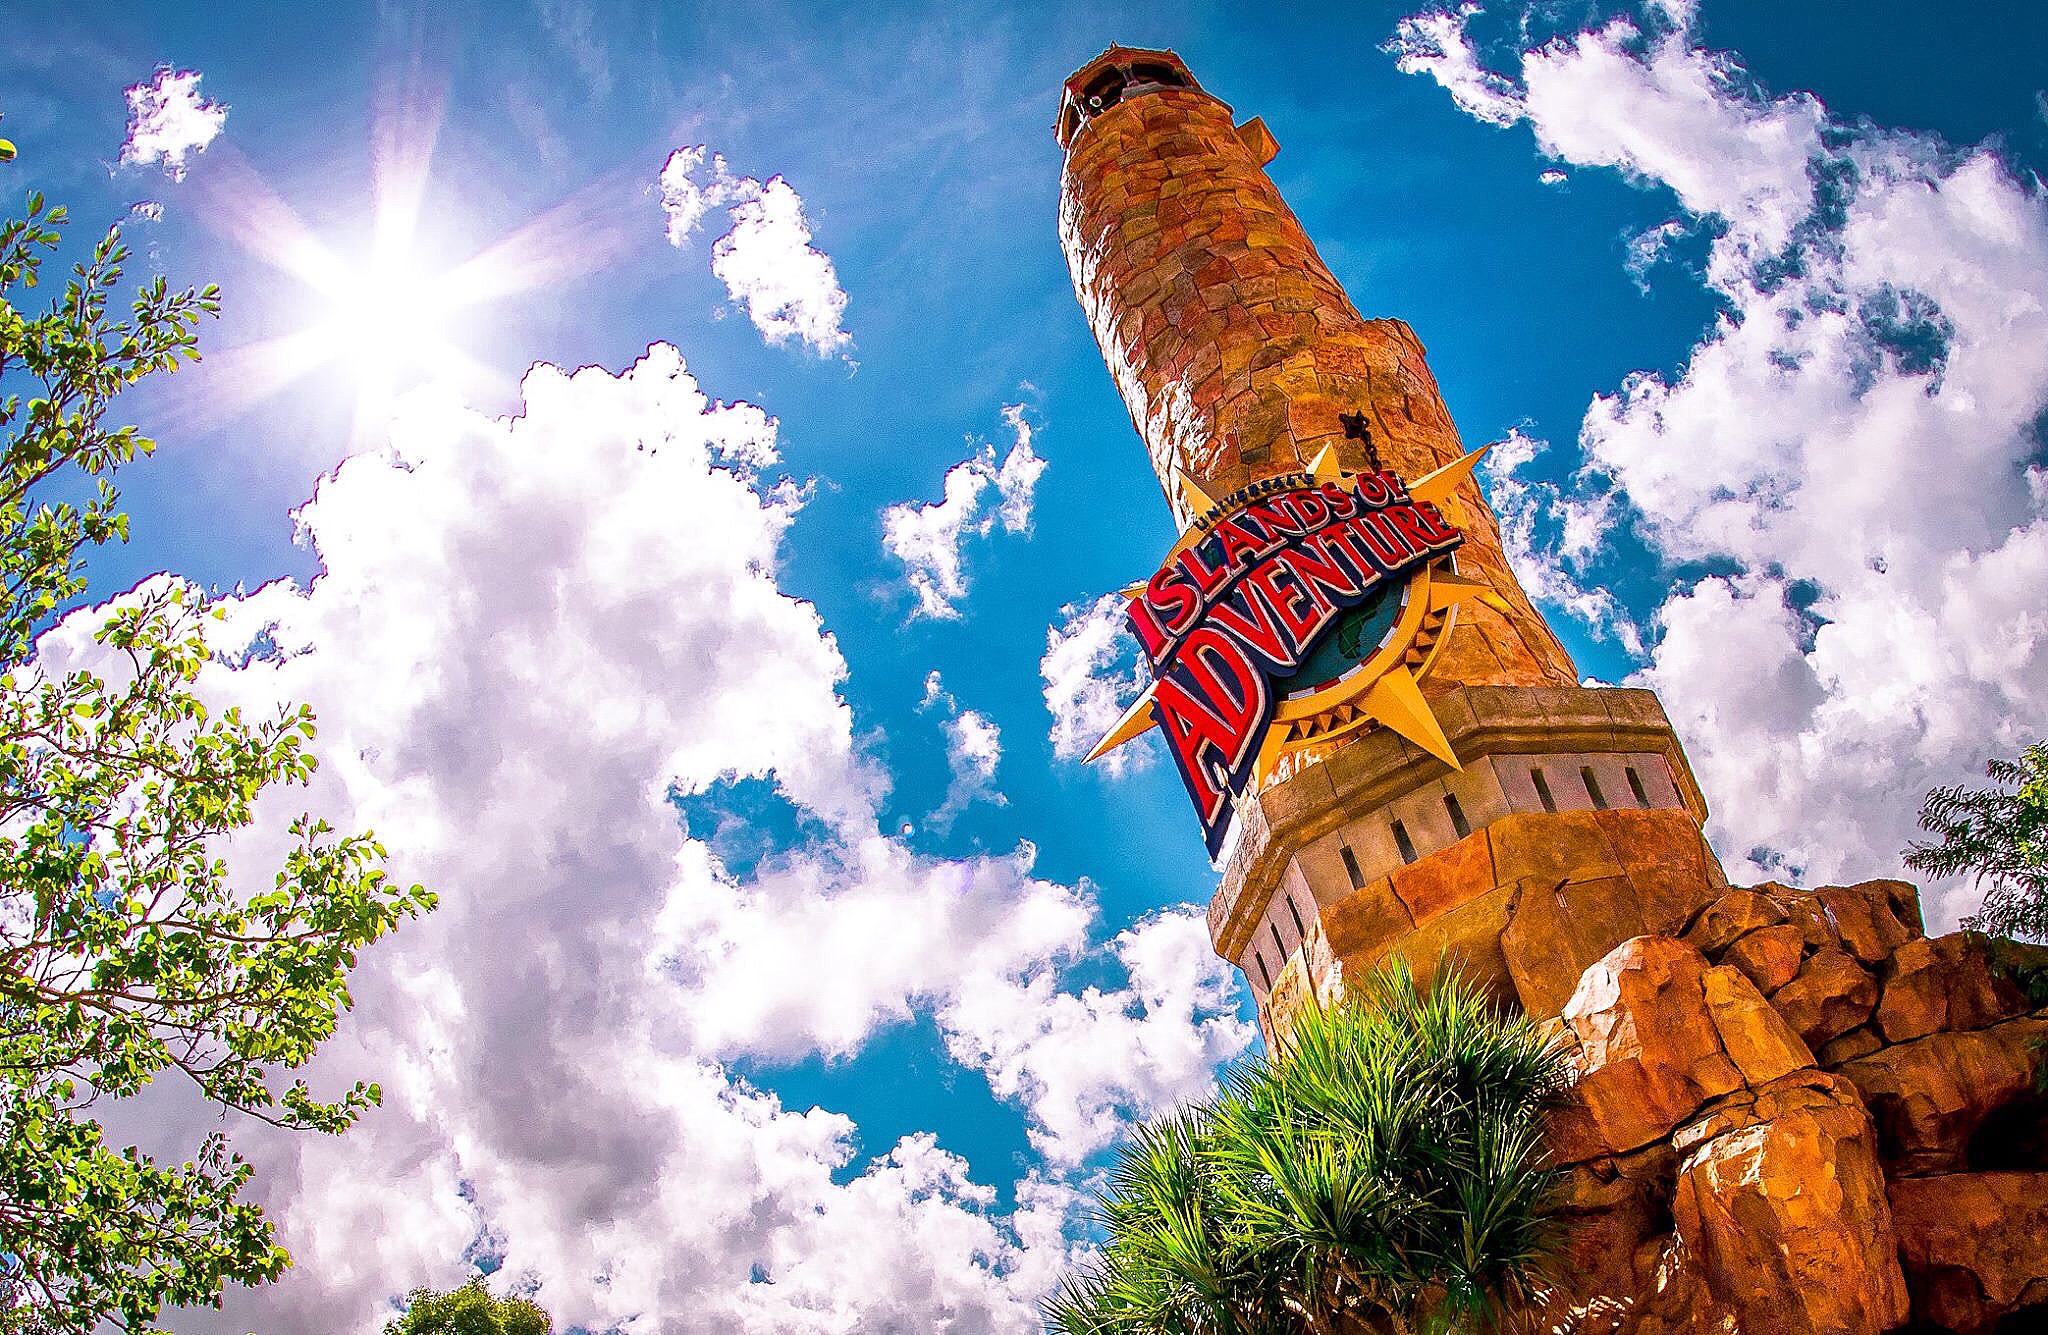 The Creation of Universal's Islands Of Adventure